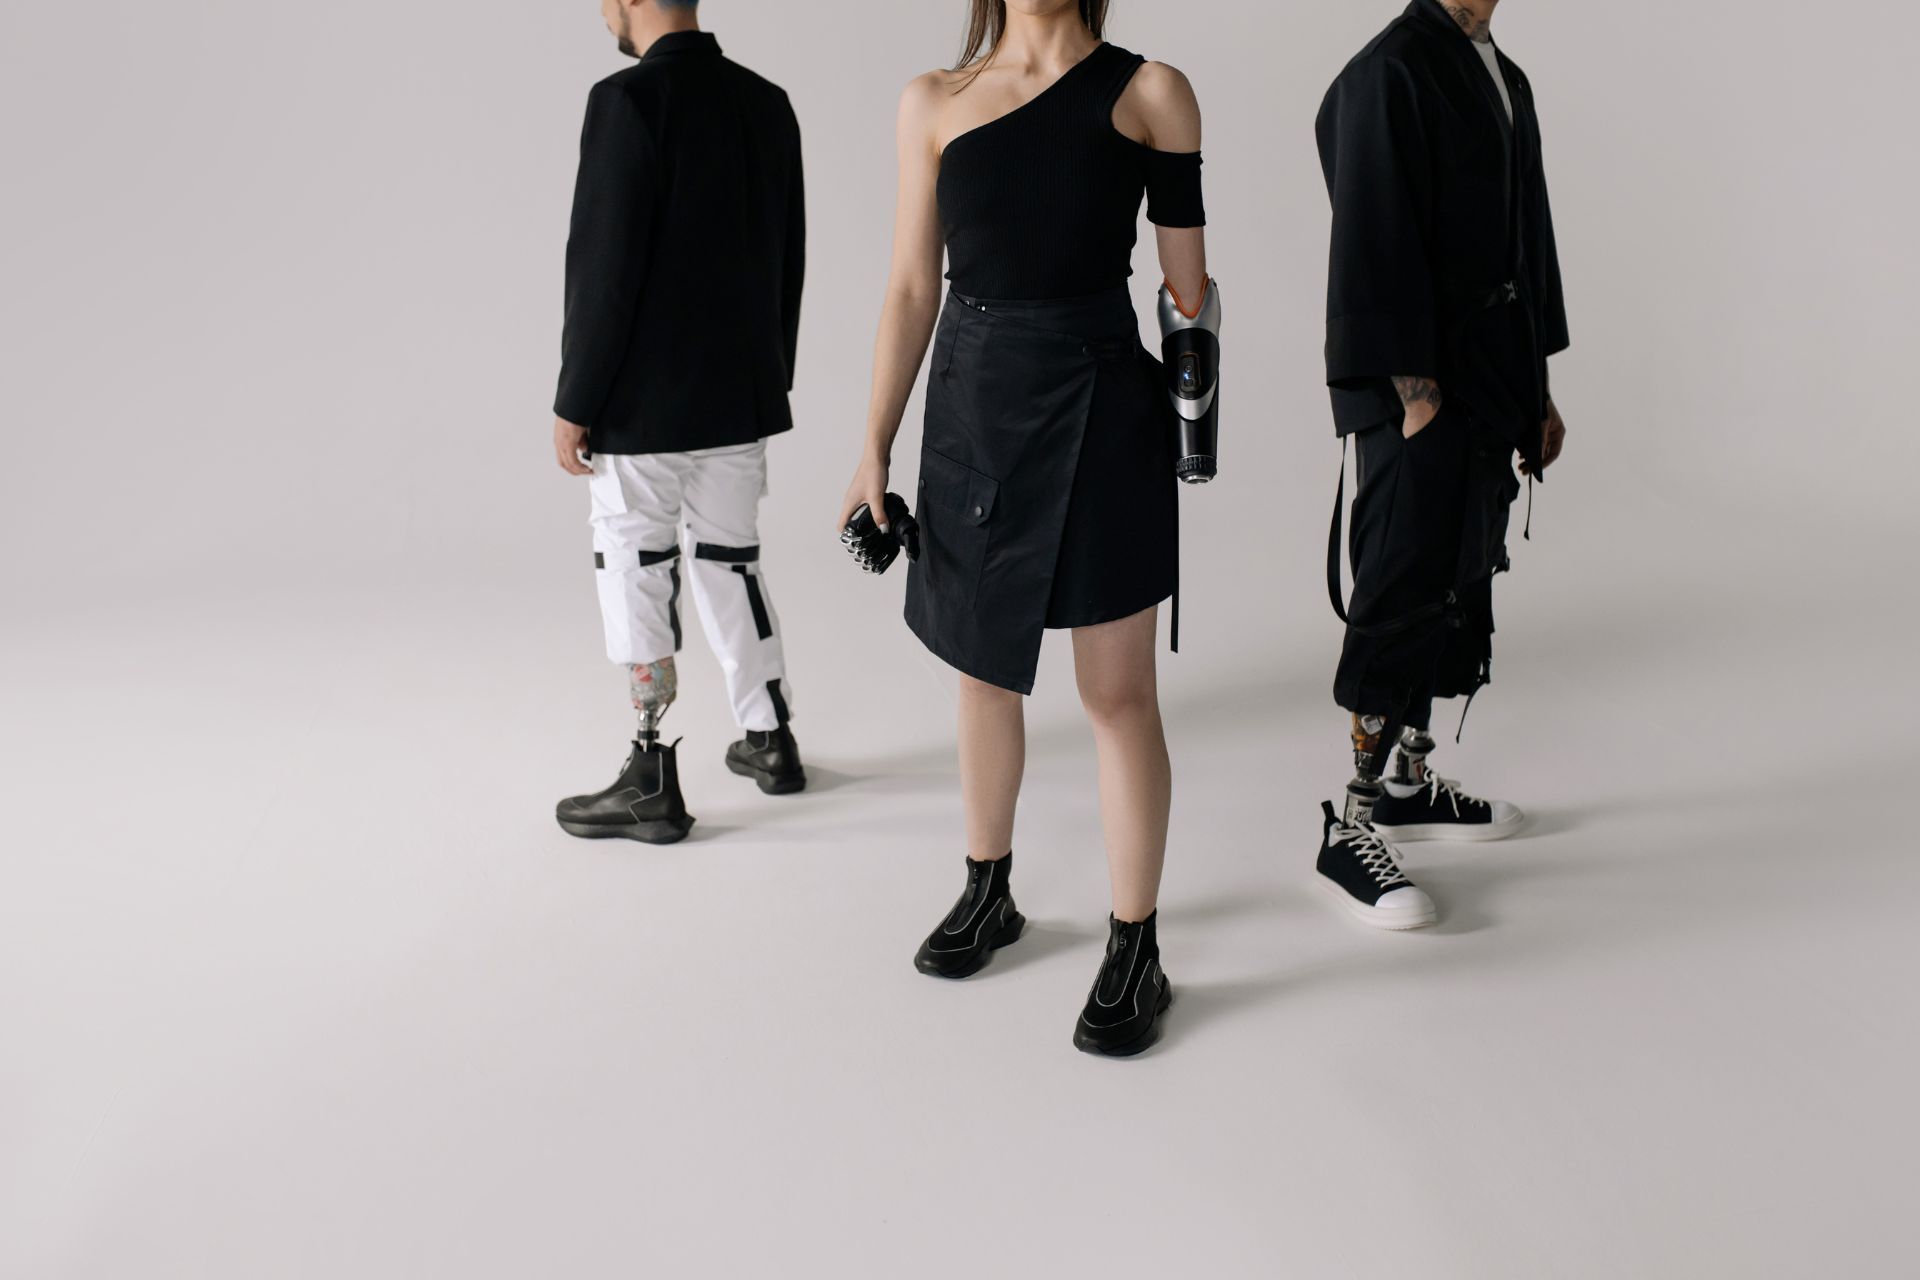 Men and Woman Wearing Prosthetic Legs and Arm